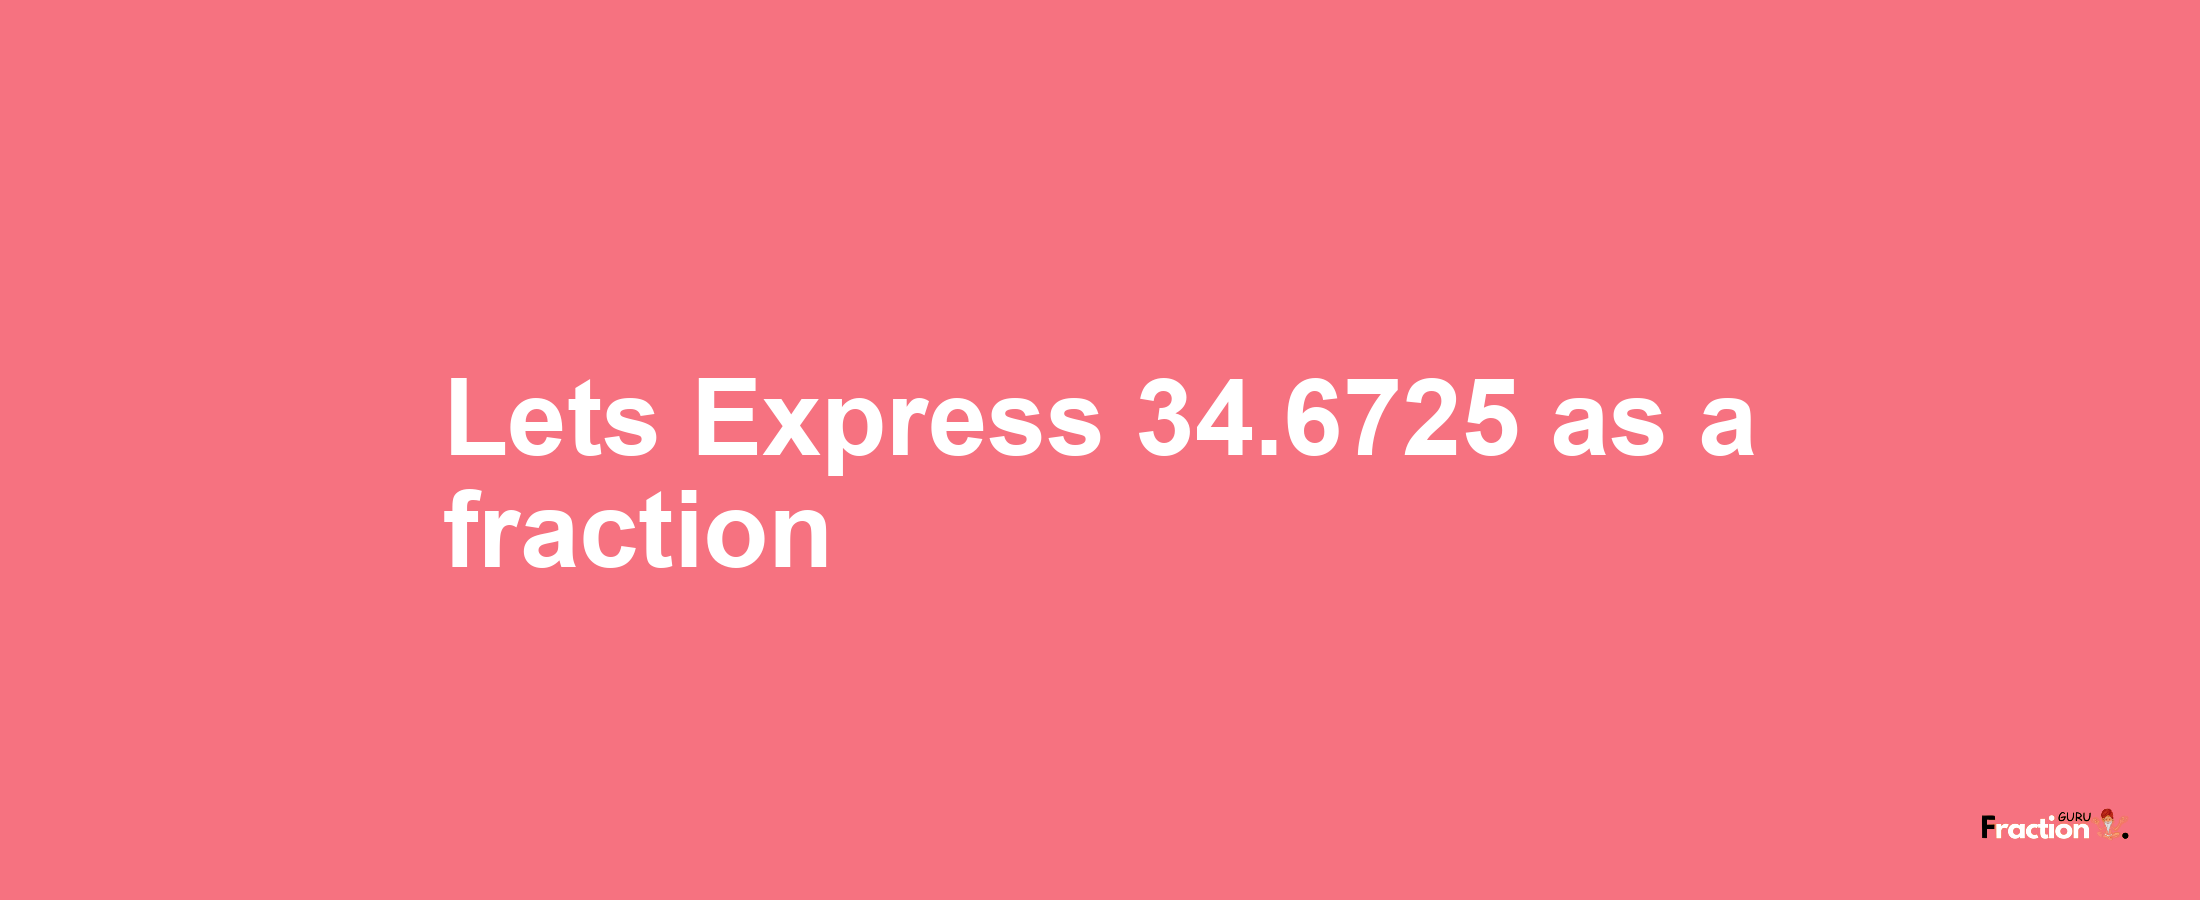 Lets Express 34.6725 as afraction